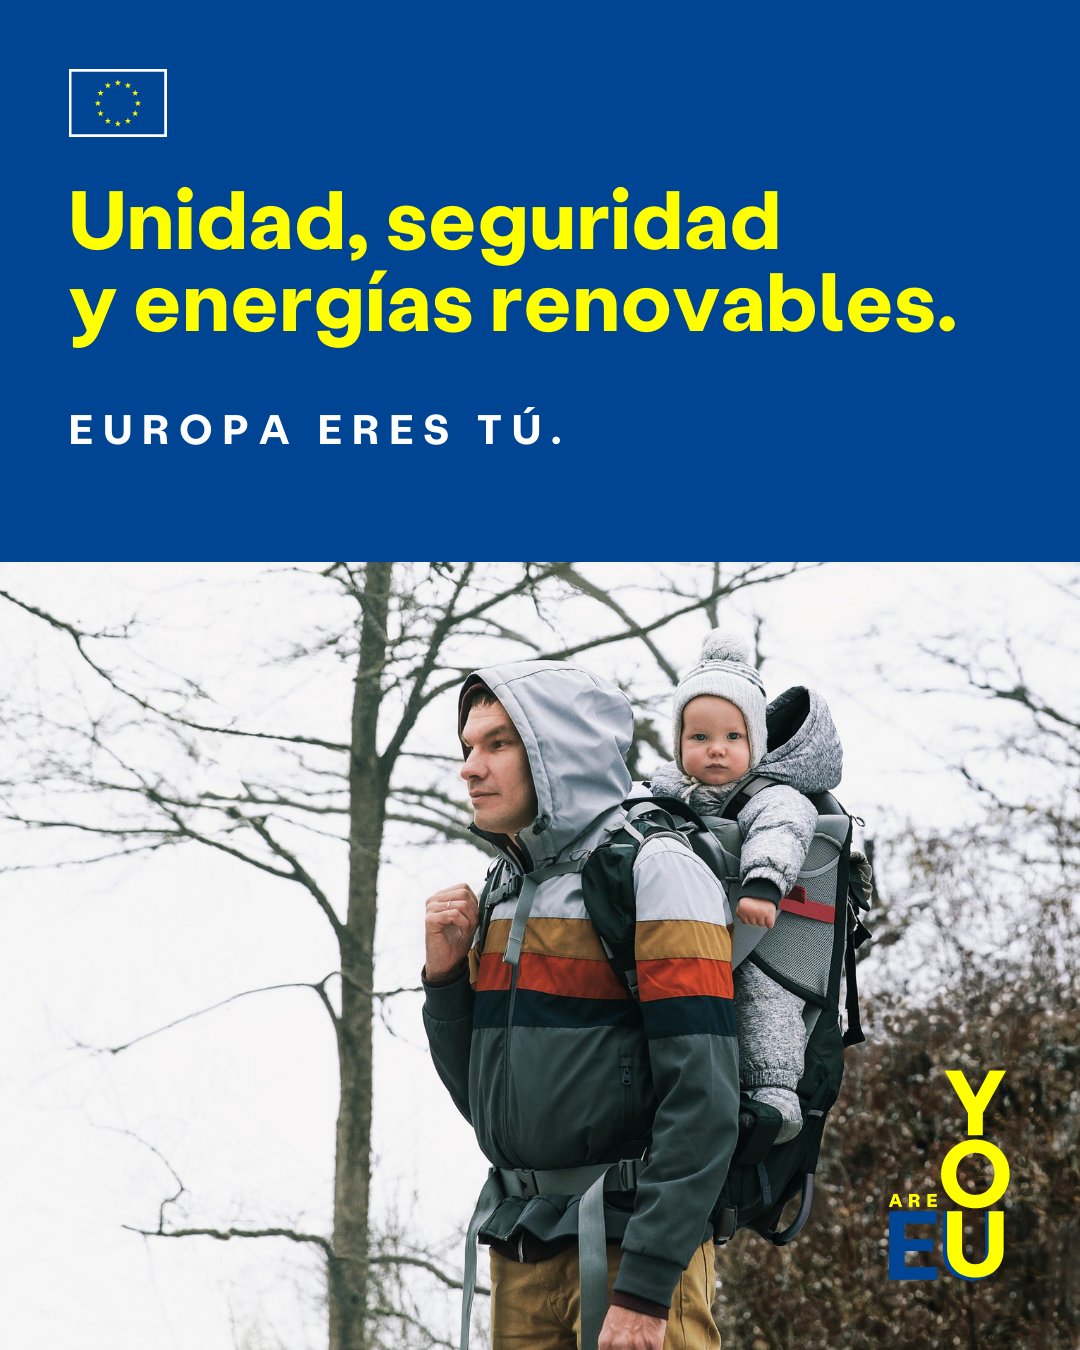 One of the EU Commission's 'You are EU' campaign banners written in Spanish